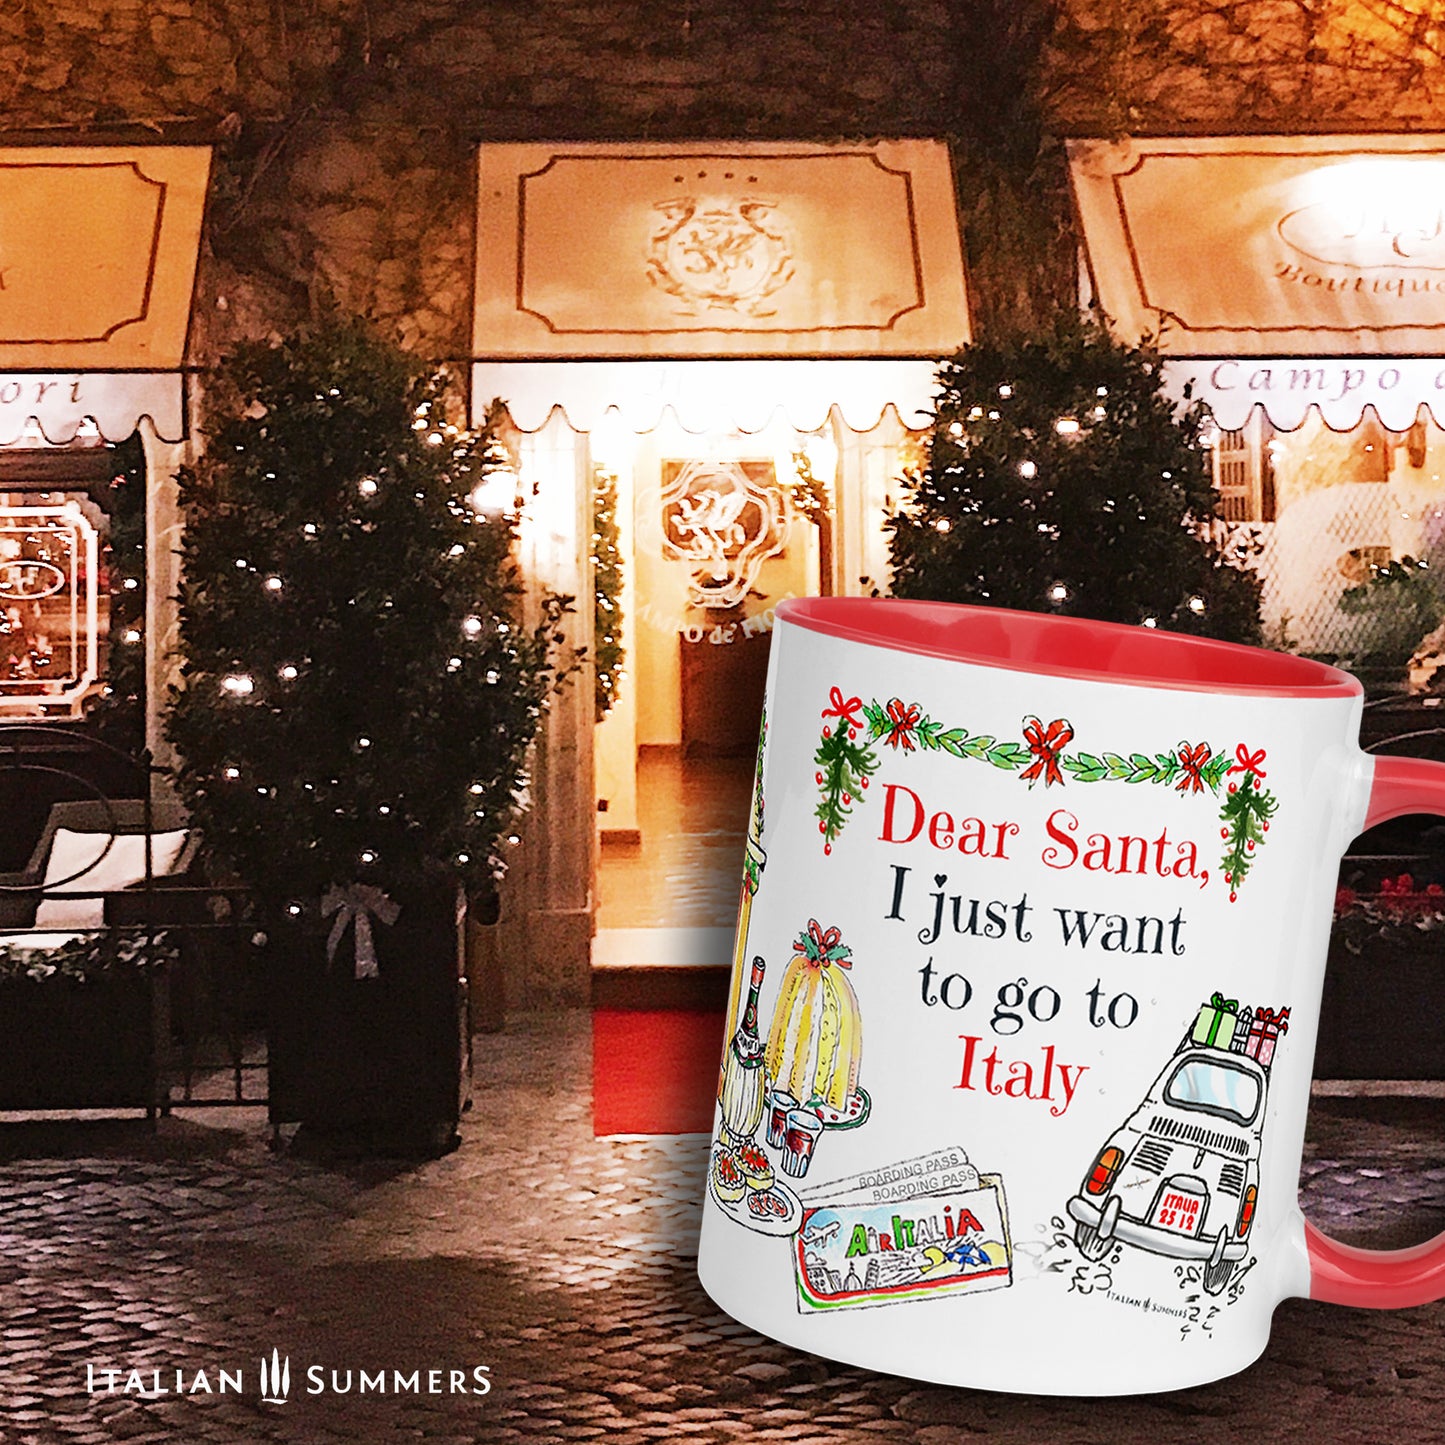 Italy Christmas mug I just want to go to Italy. This cute mug represents sketches of a vintage Cinquecento seen from the back with presents on the roof, a ticket to Italy, Italian panettone, a book about Italy to cuddle up in front of the fireplace, a flask of good chianti wine, Italian presents and of course our best seller bag "I don't need therapy, I just need to got to Italy". Buon Natale :-) Made with amore by Italian Summers